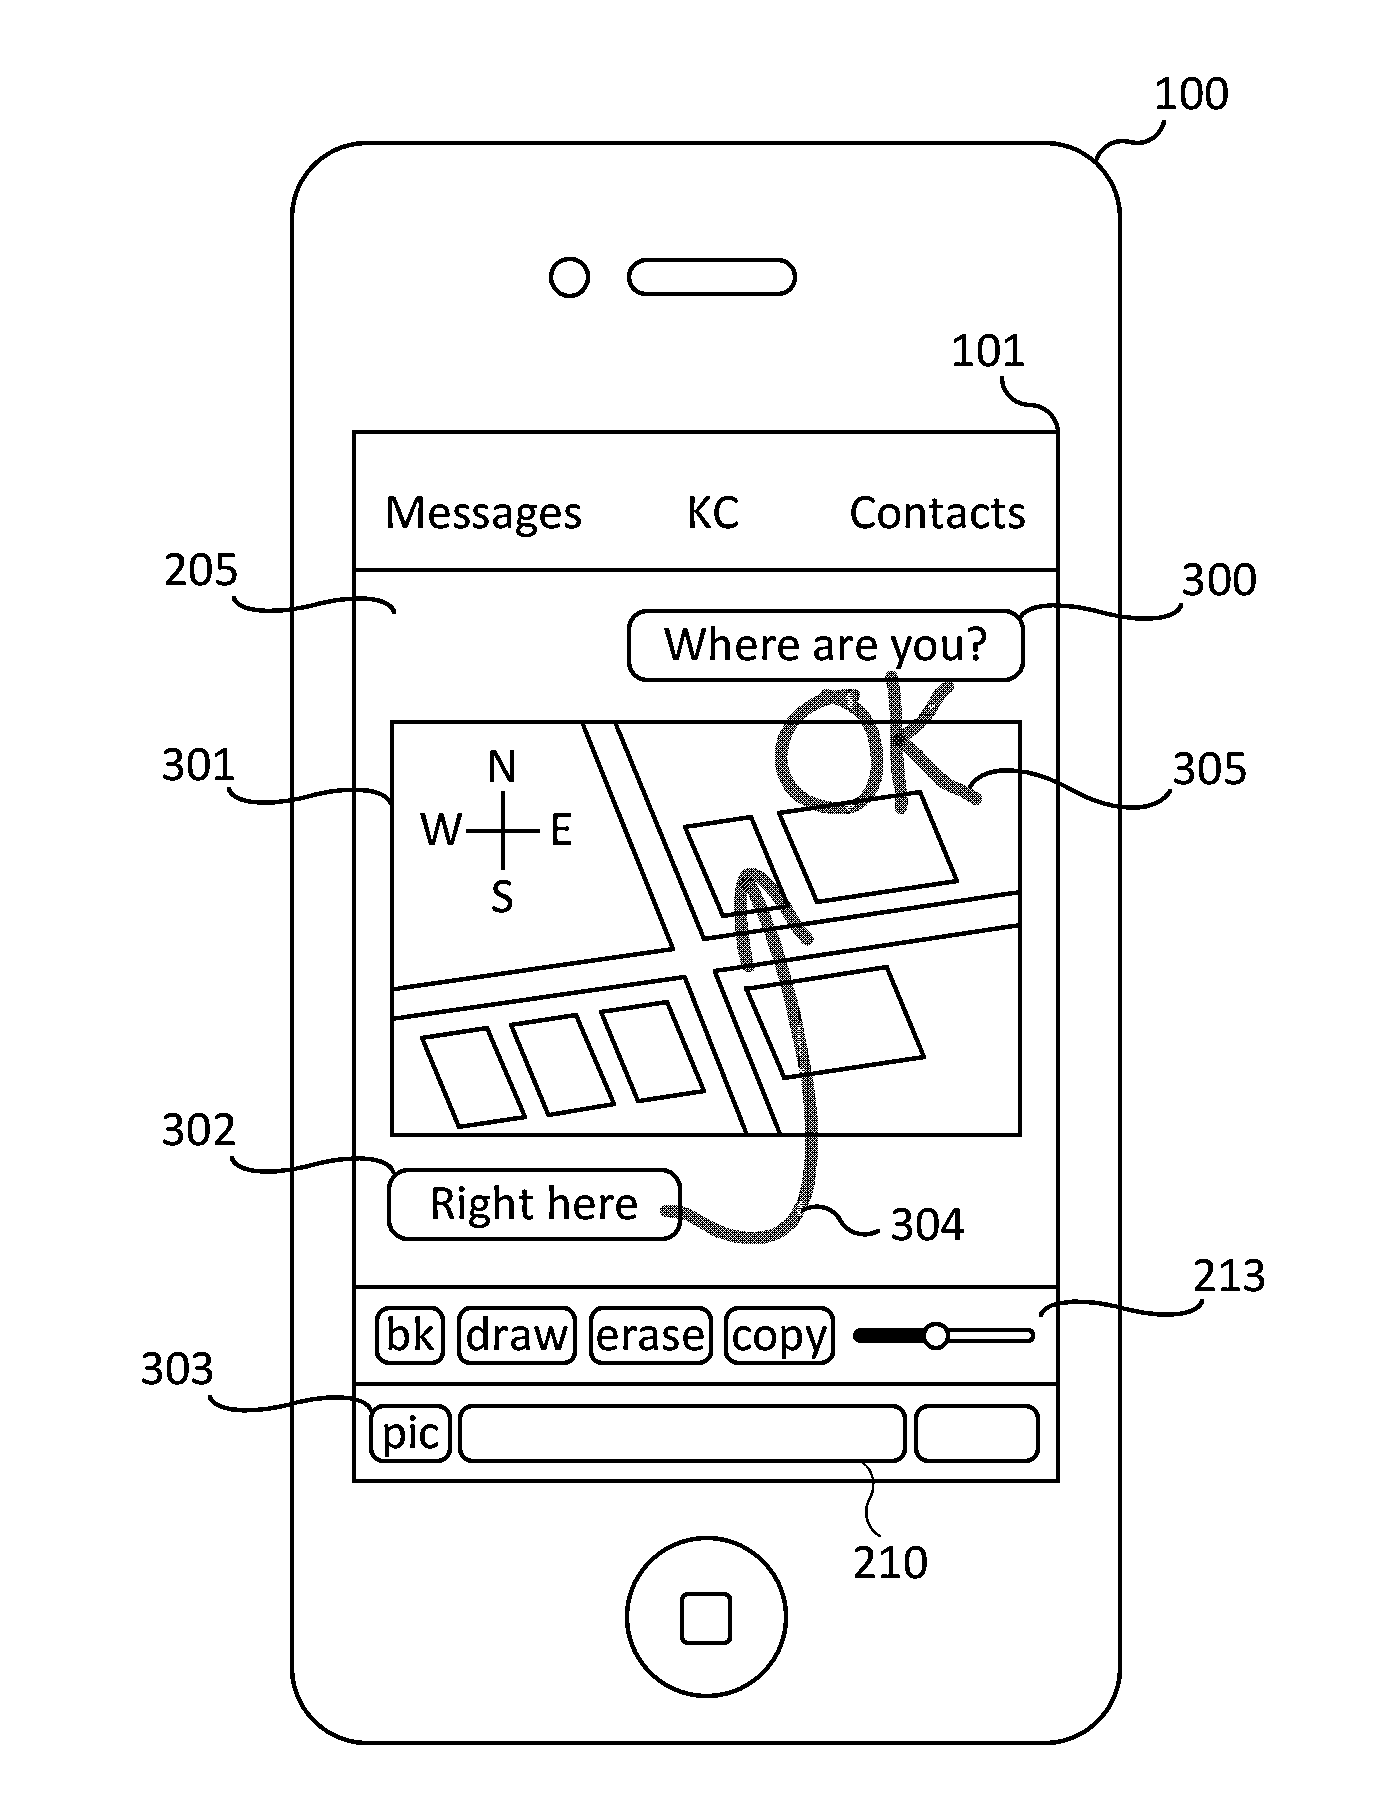 Messaging with drawn graphic input